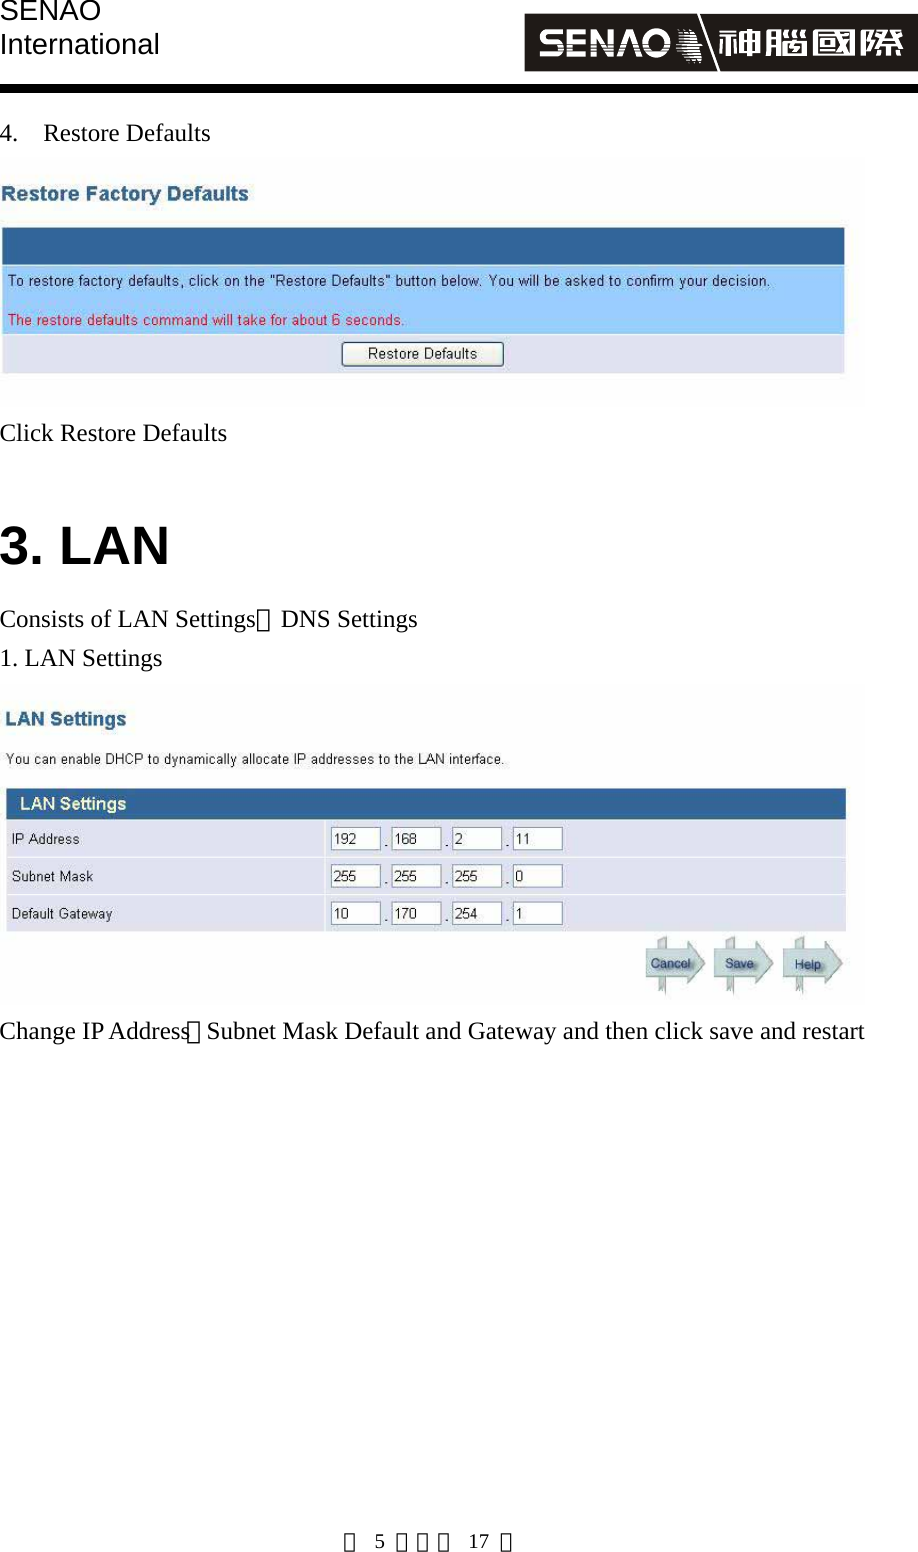 SENAO International   第 5 頁，共 17 頁 4. Restore Defaults  Click Restore Defaults    3. LAN Consists of LAN Settings、DNS Settings   1. LAN Settings  Change IP Address、Subnet Mask Default and Gateway and then click save and restart  